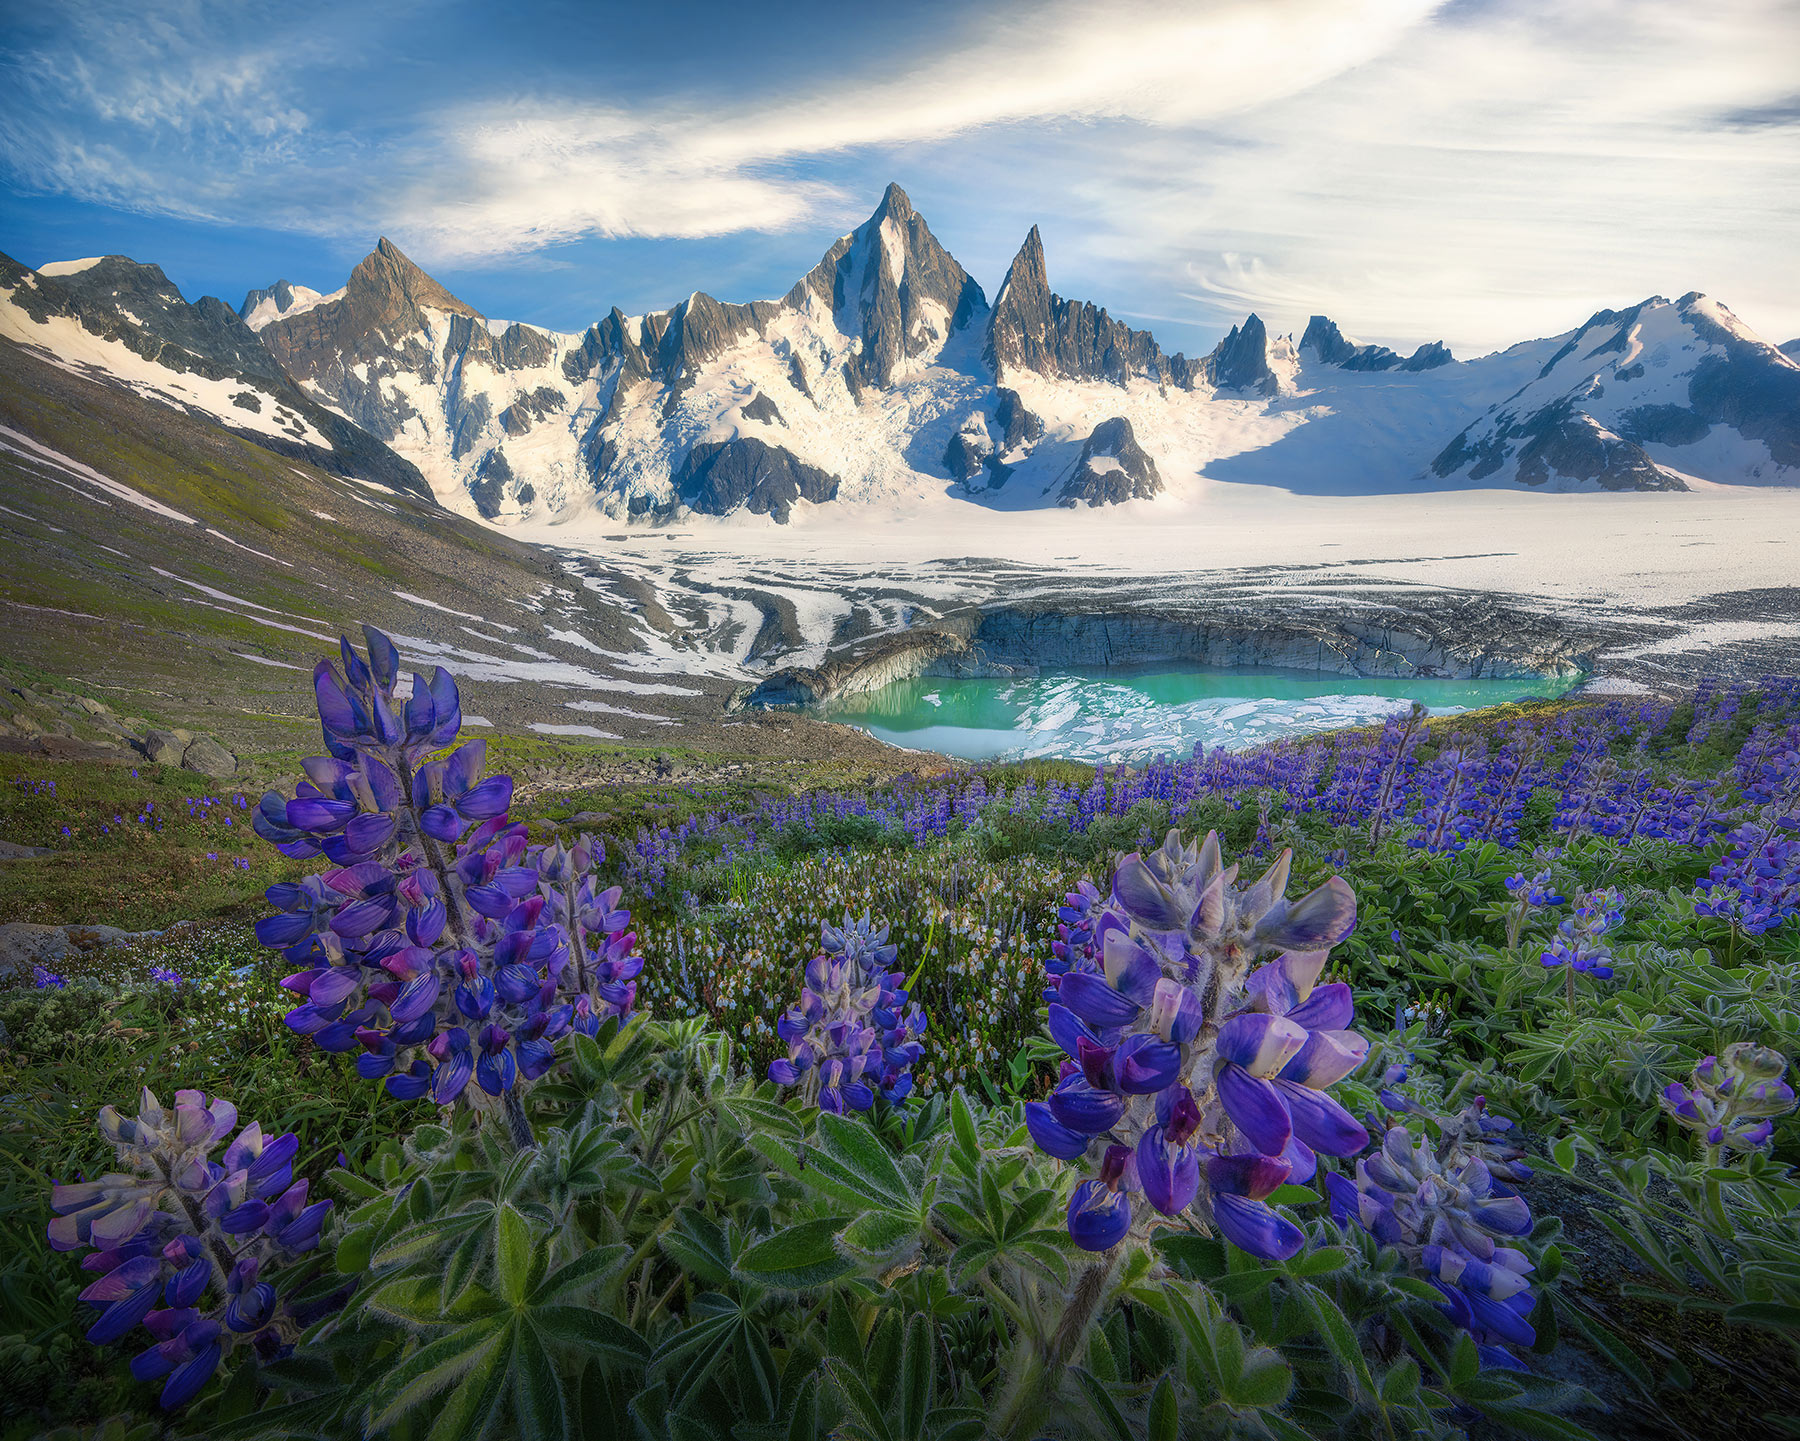 An amazing collection of blooms in the middle of the most glaciated mountain range on Earth outside of the Arctic.